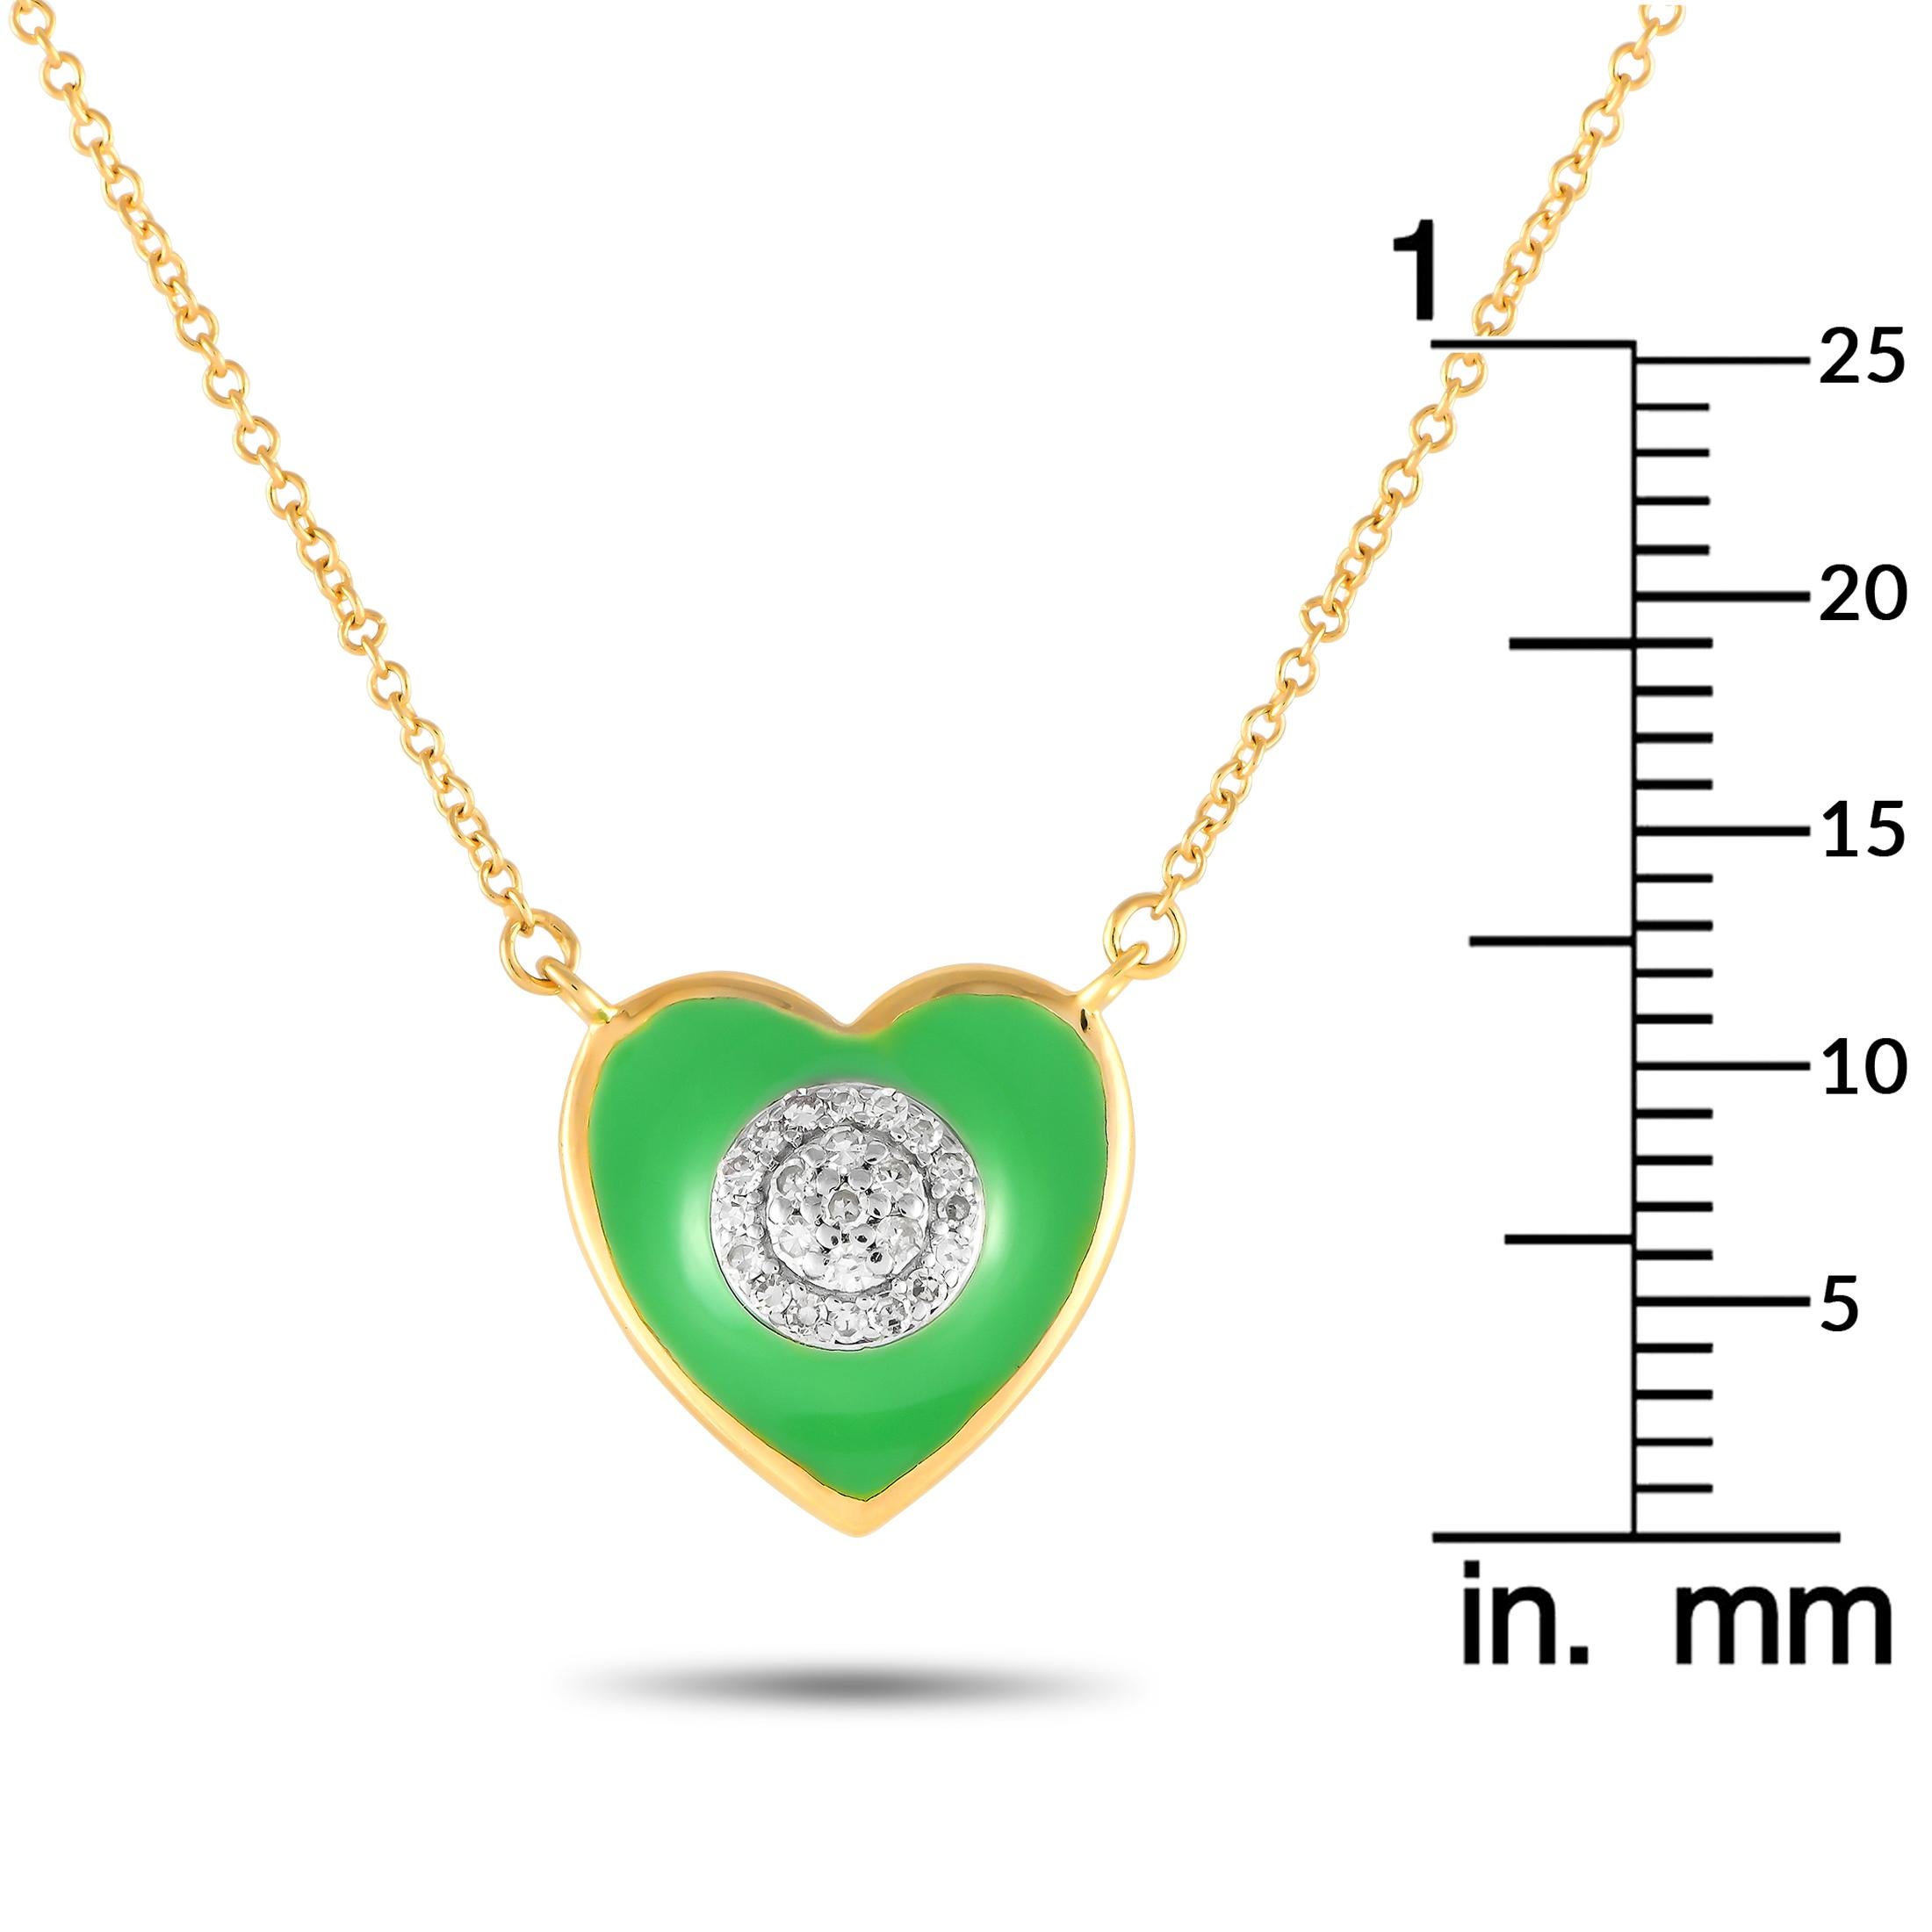 LB Exclusive 14K Yellow Gold Diamond & Green Enamel Heart Necklace PN15066 In New Condition For Sale In Southampton, PA